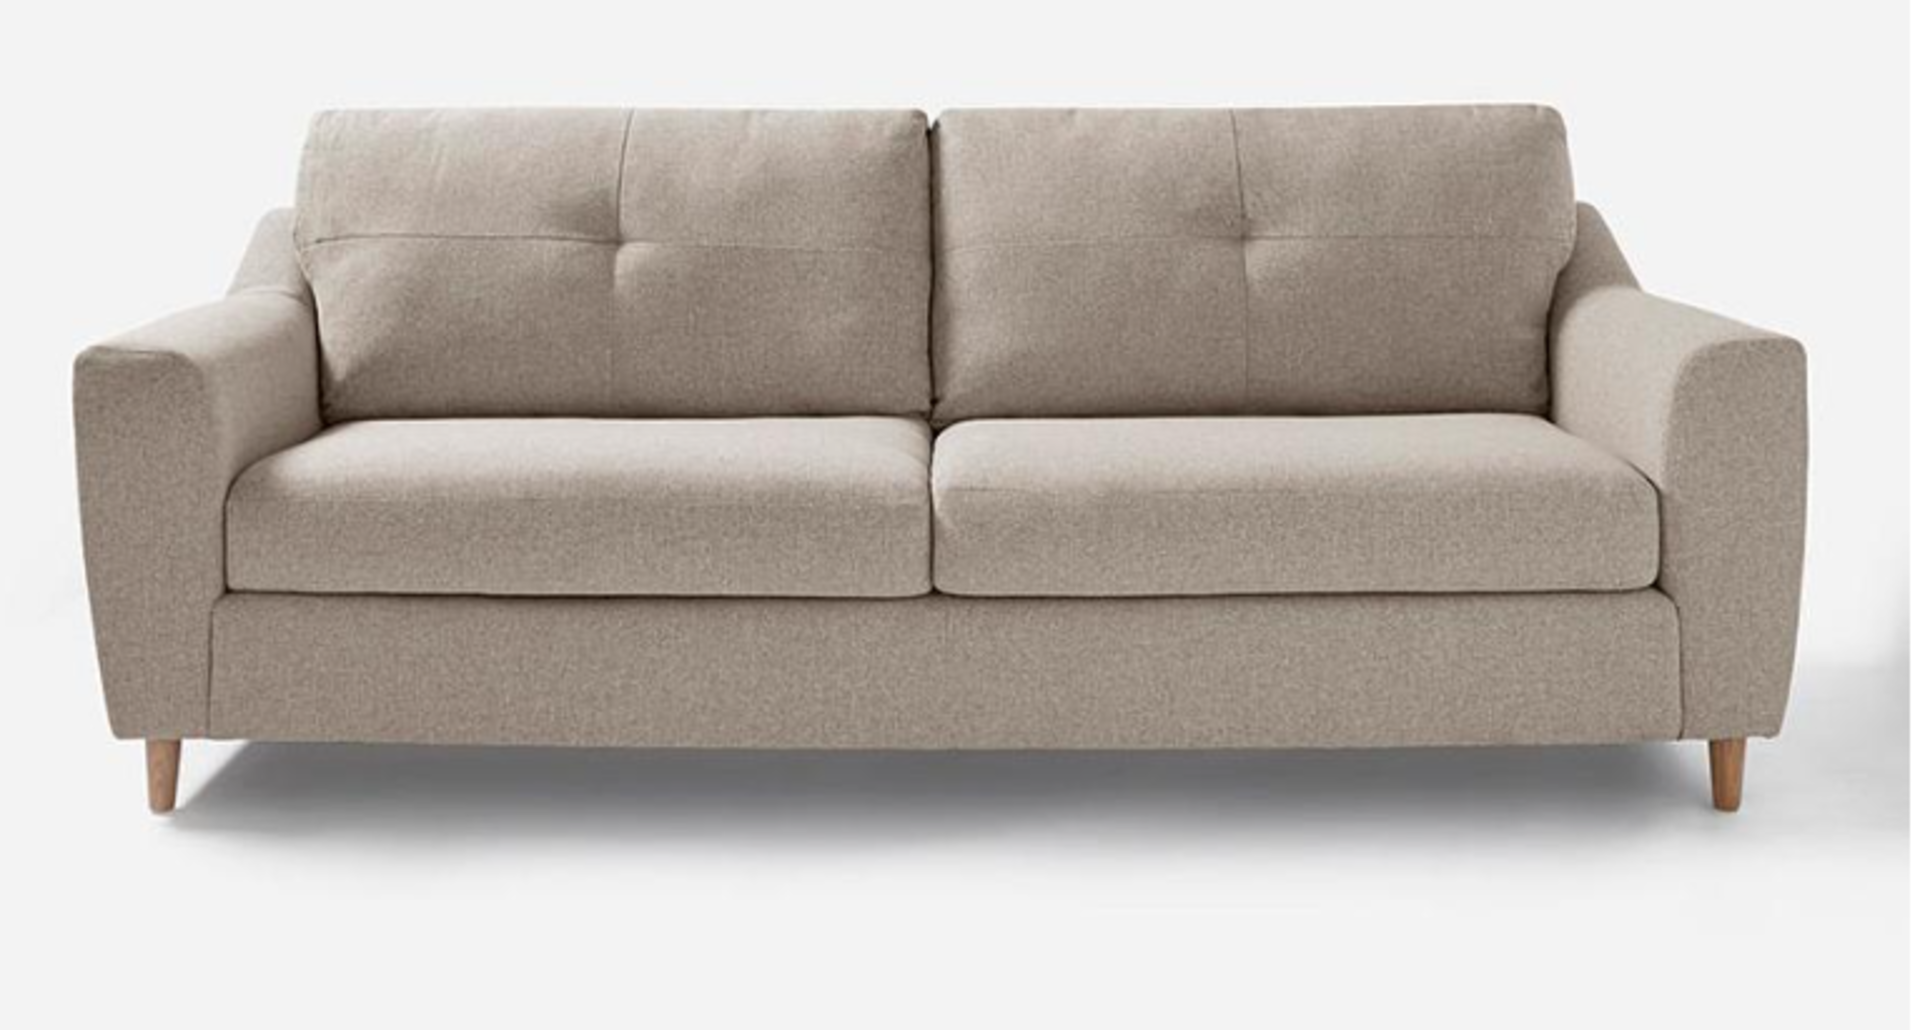 Baxter 4 Seater Sofa. - SR. RRP £999.00. The contemporary style of the Baxter range is both on-trend